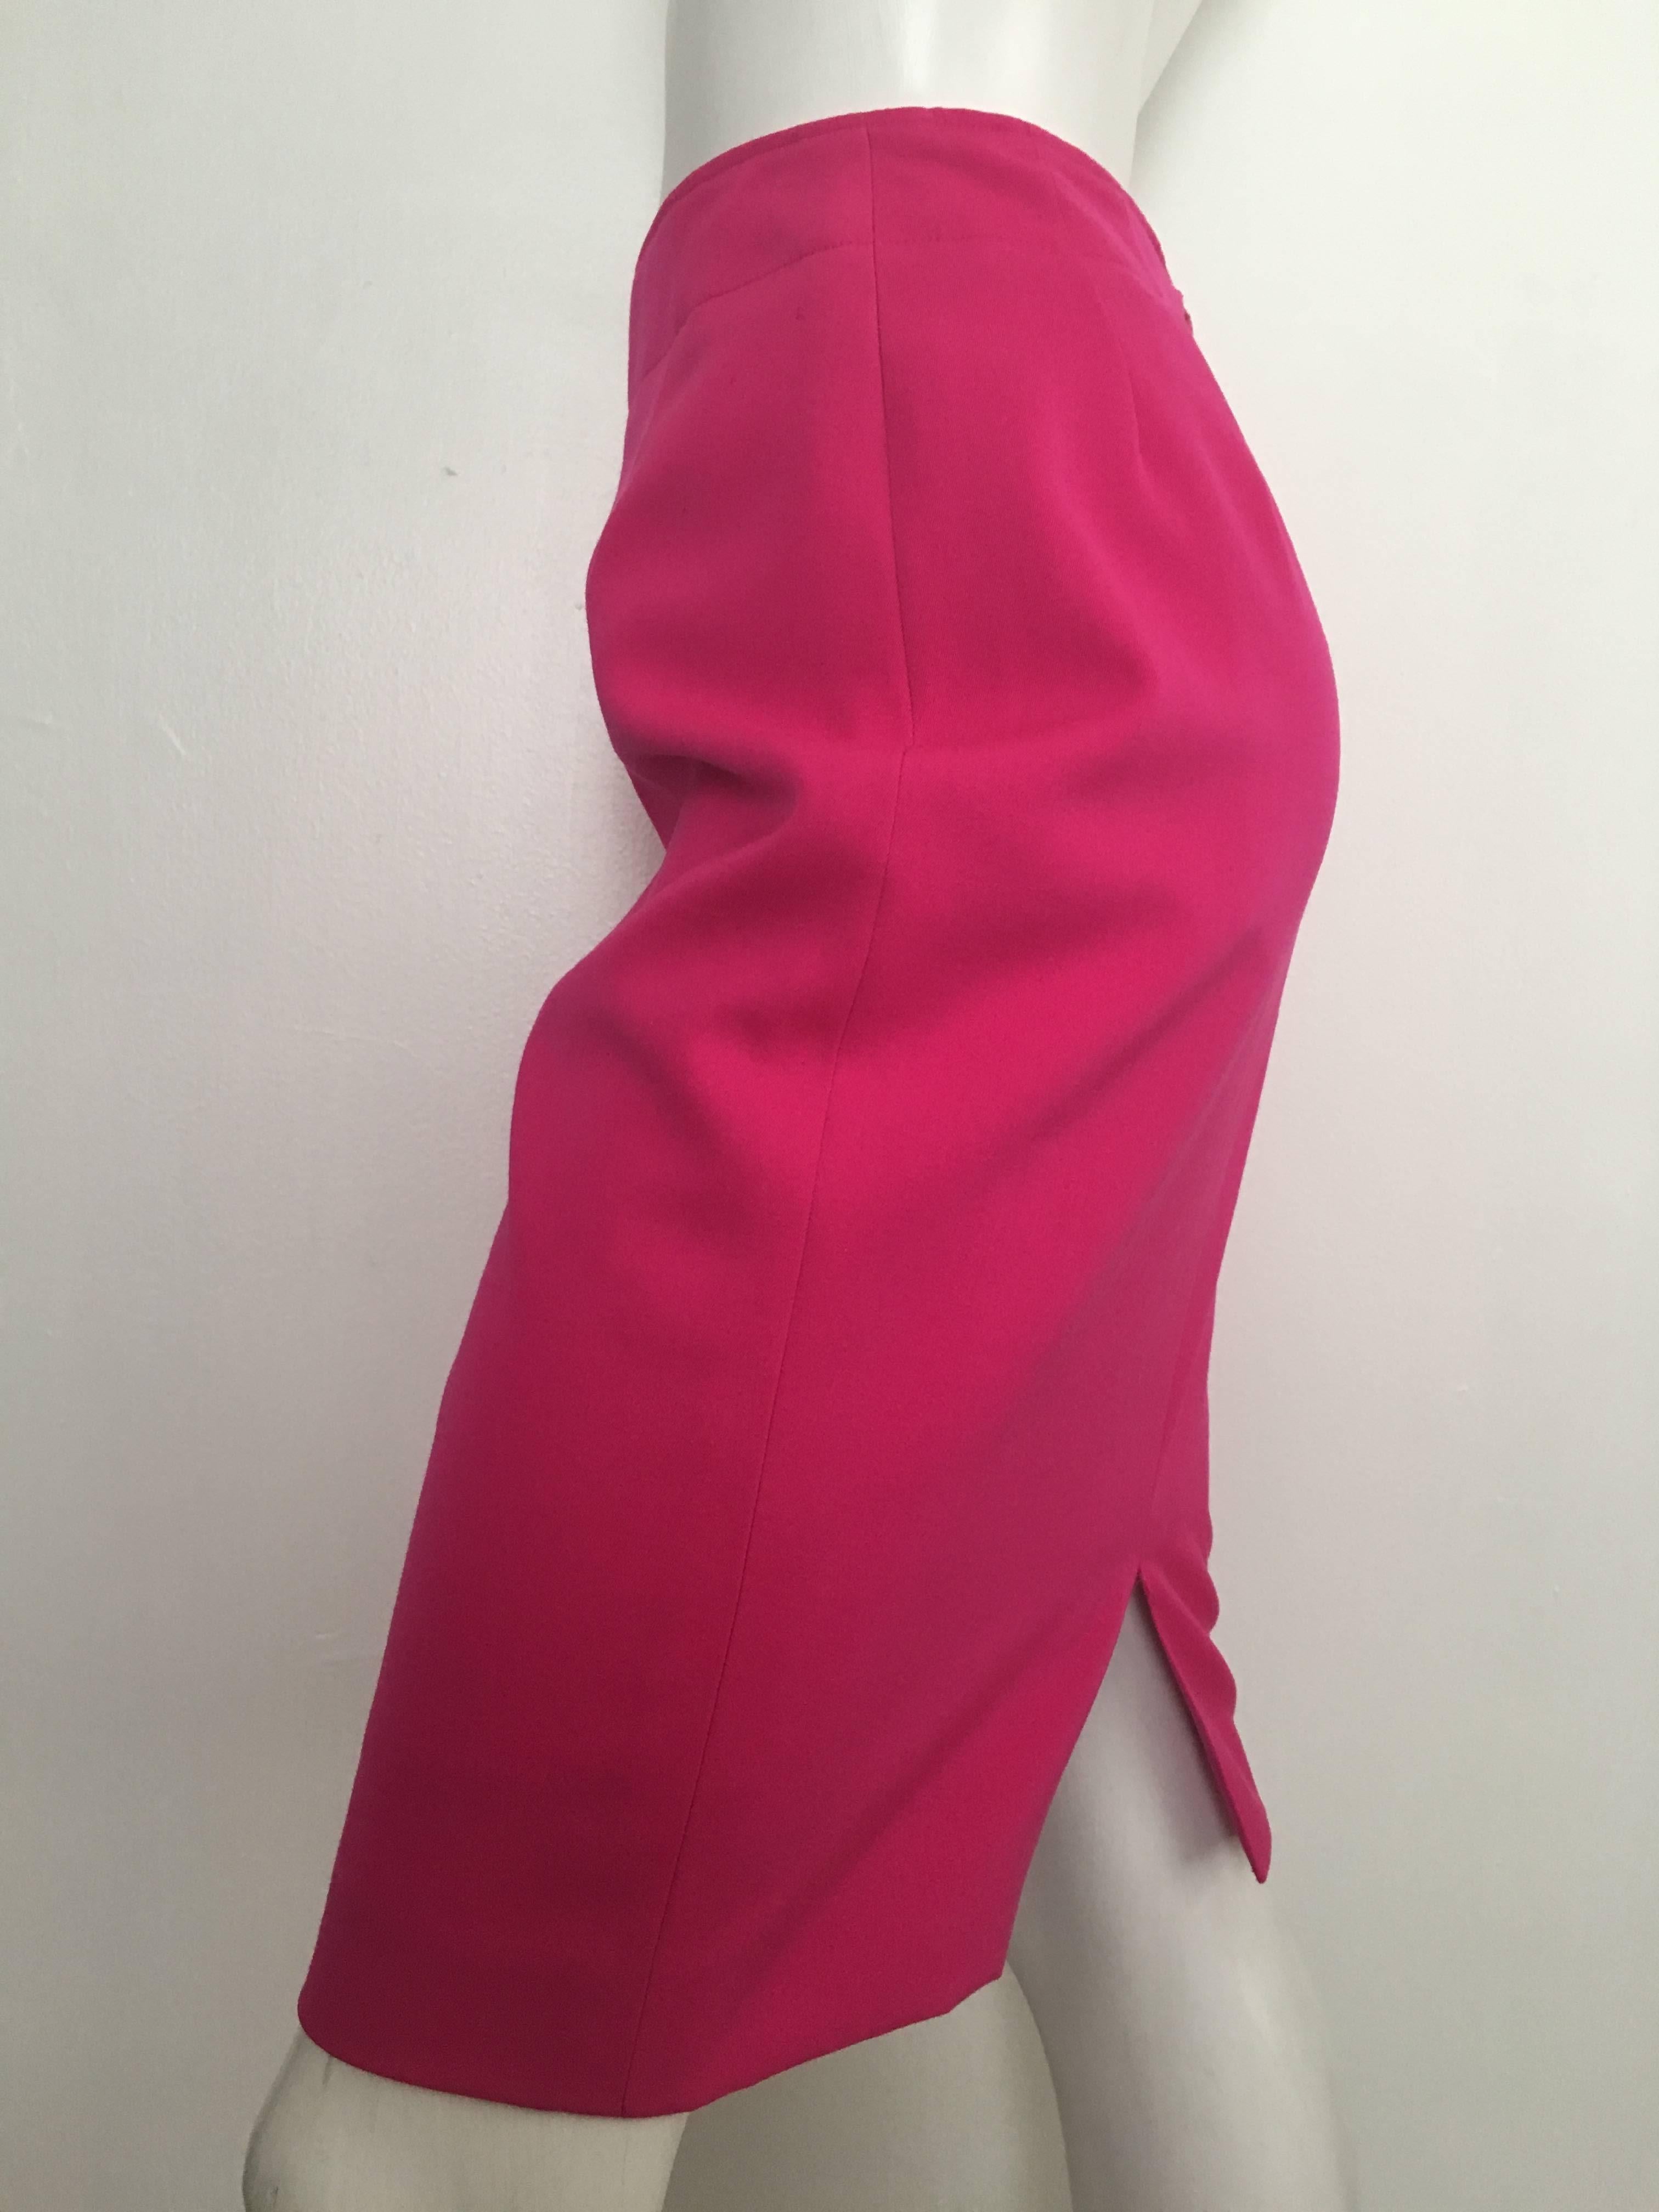 Lolita Lempicka Wool Pink Sexy Pencil Skirt Size 6. In Excellent Condition For Sale In Atlanta, GA